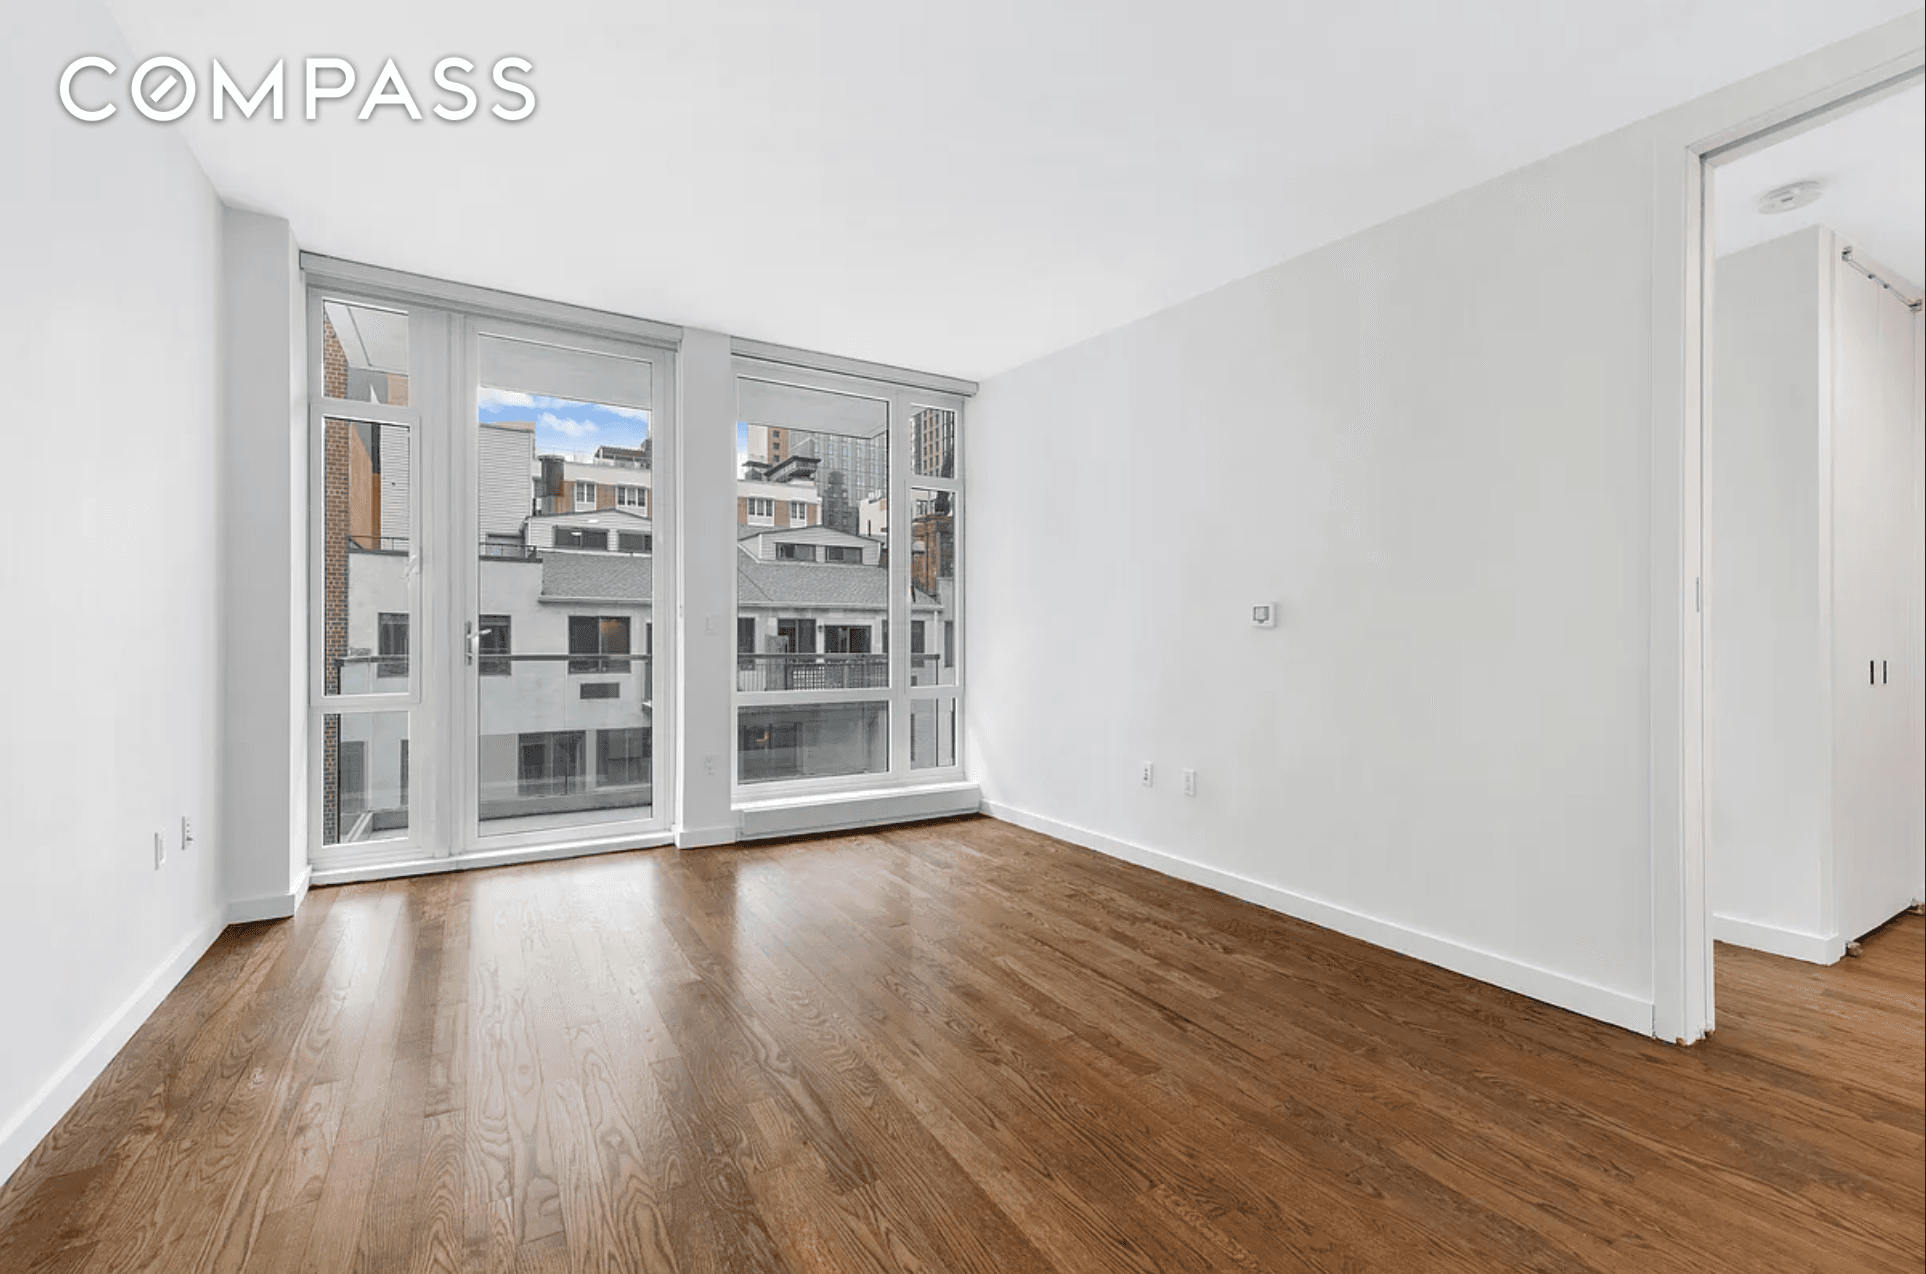 Brand new to market ! ! Rent this beautiful, spacious one bedroom, one bath apartment with private outdoor space, wide plank hardwood floors, over 9 foot ceilings, and floor to ...